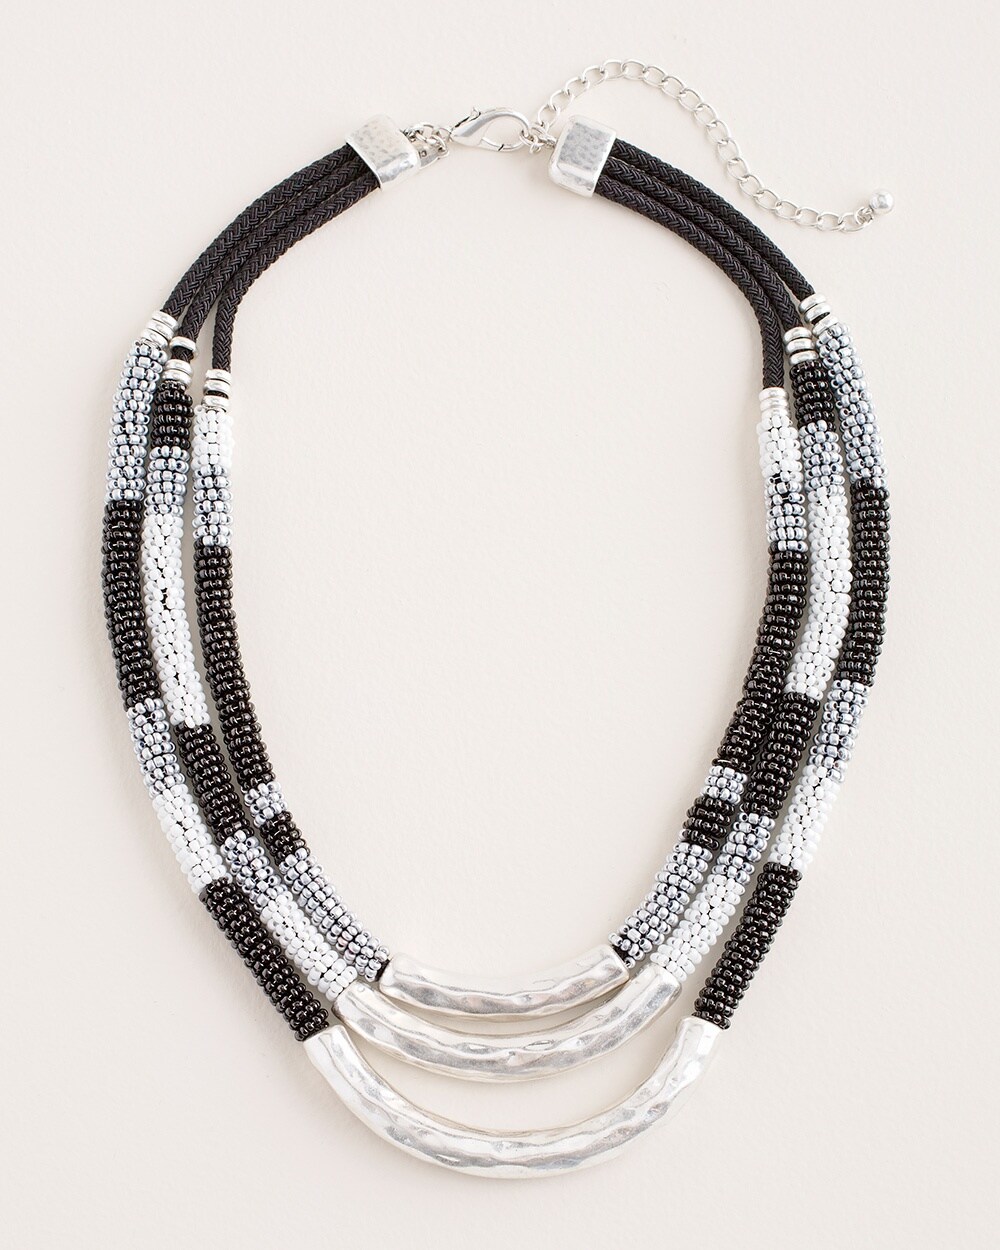 Black and White Multi-Strand Seed Bead Necklace